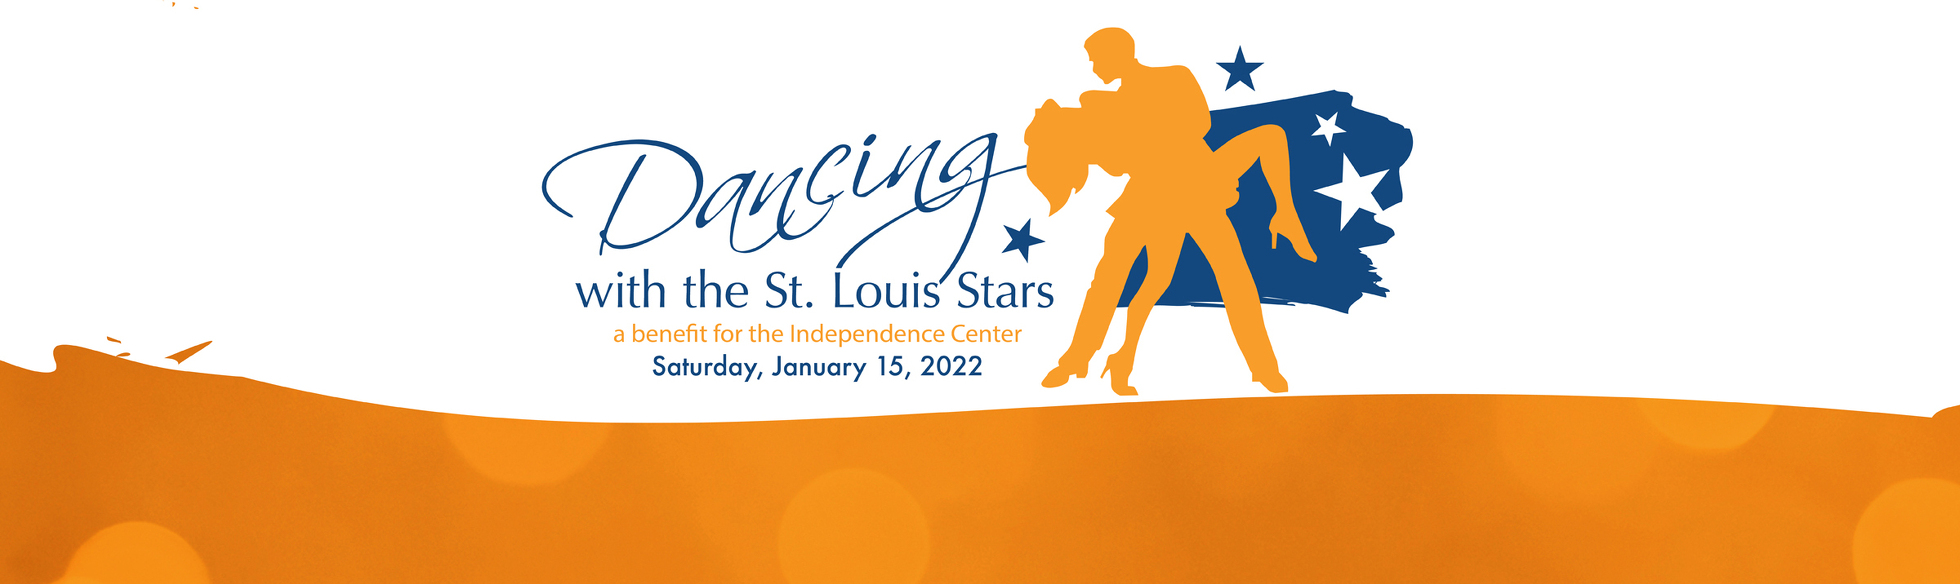 Dancing with the St. Louis Stars 2022